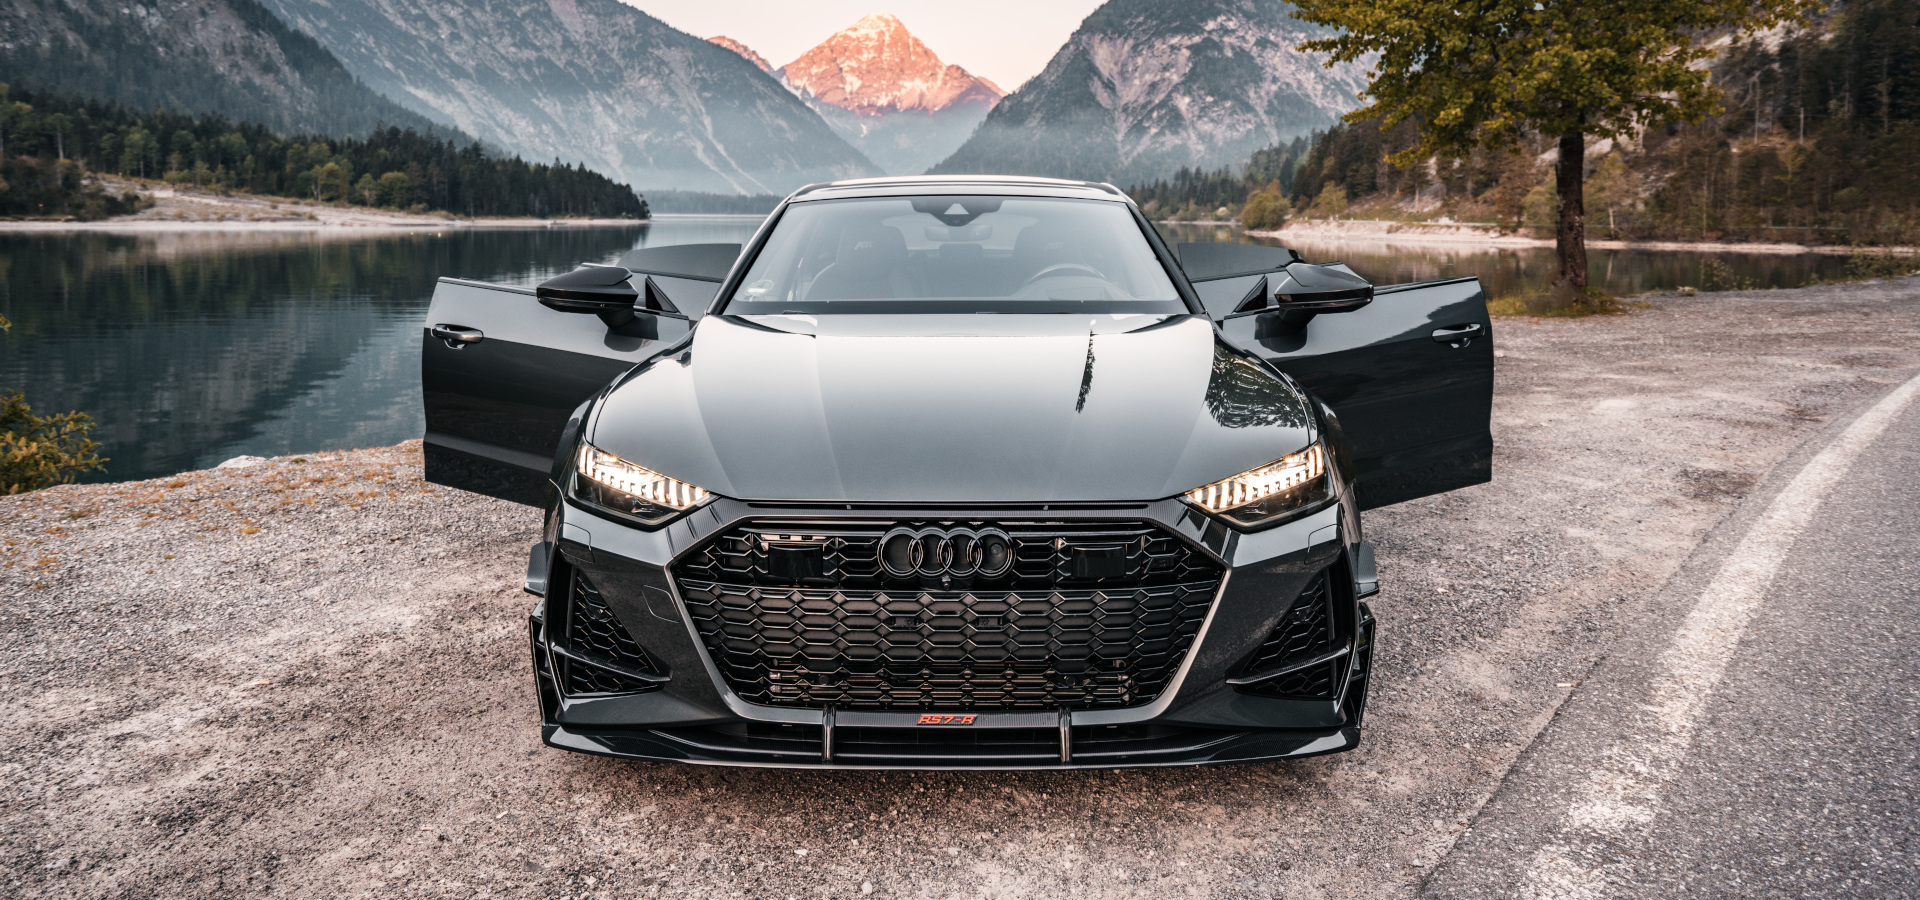 Abt Rs7 R Abt Sportsline